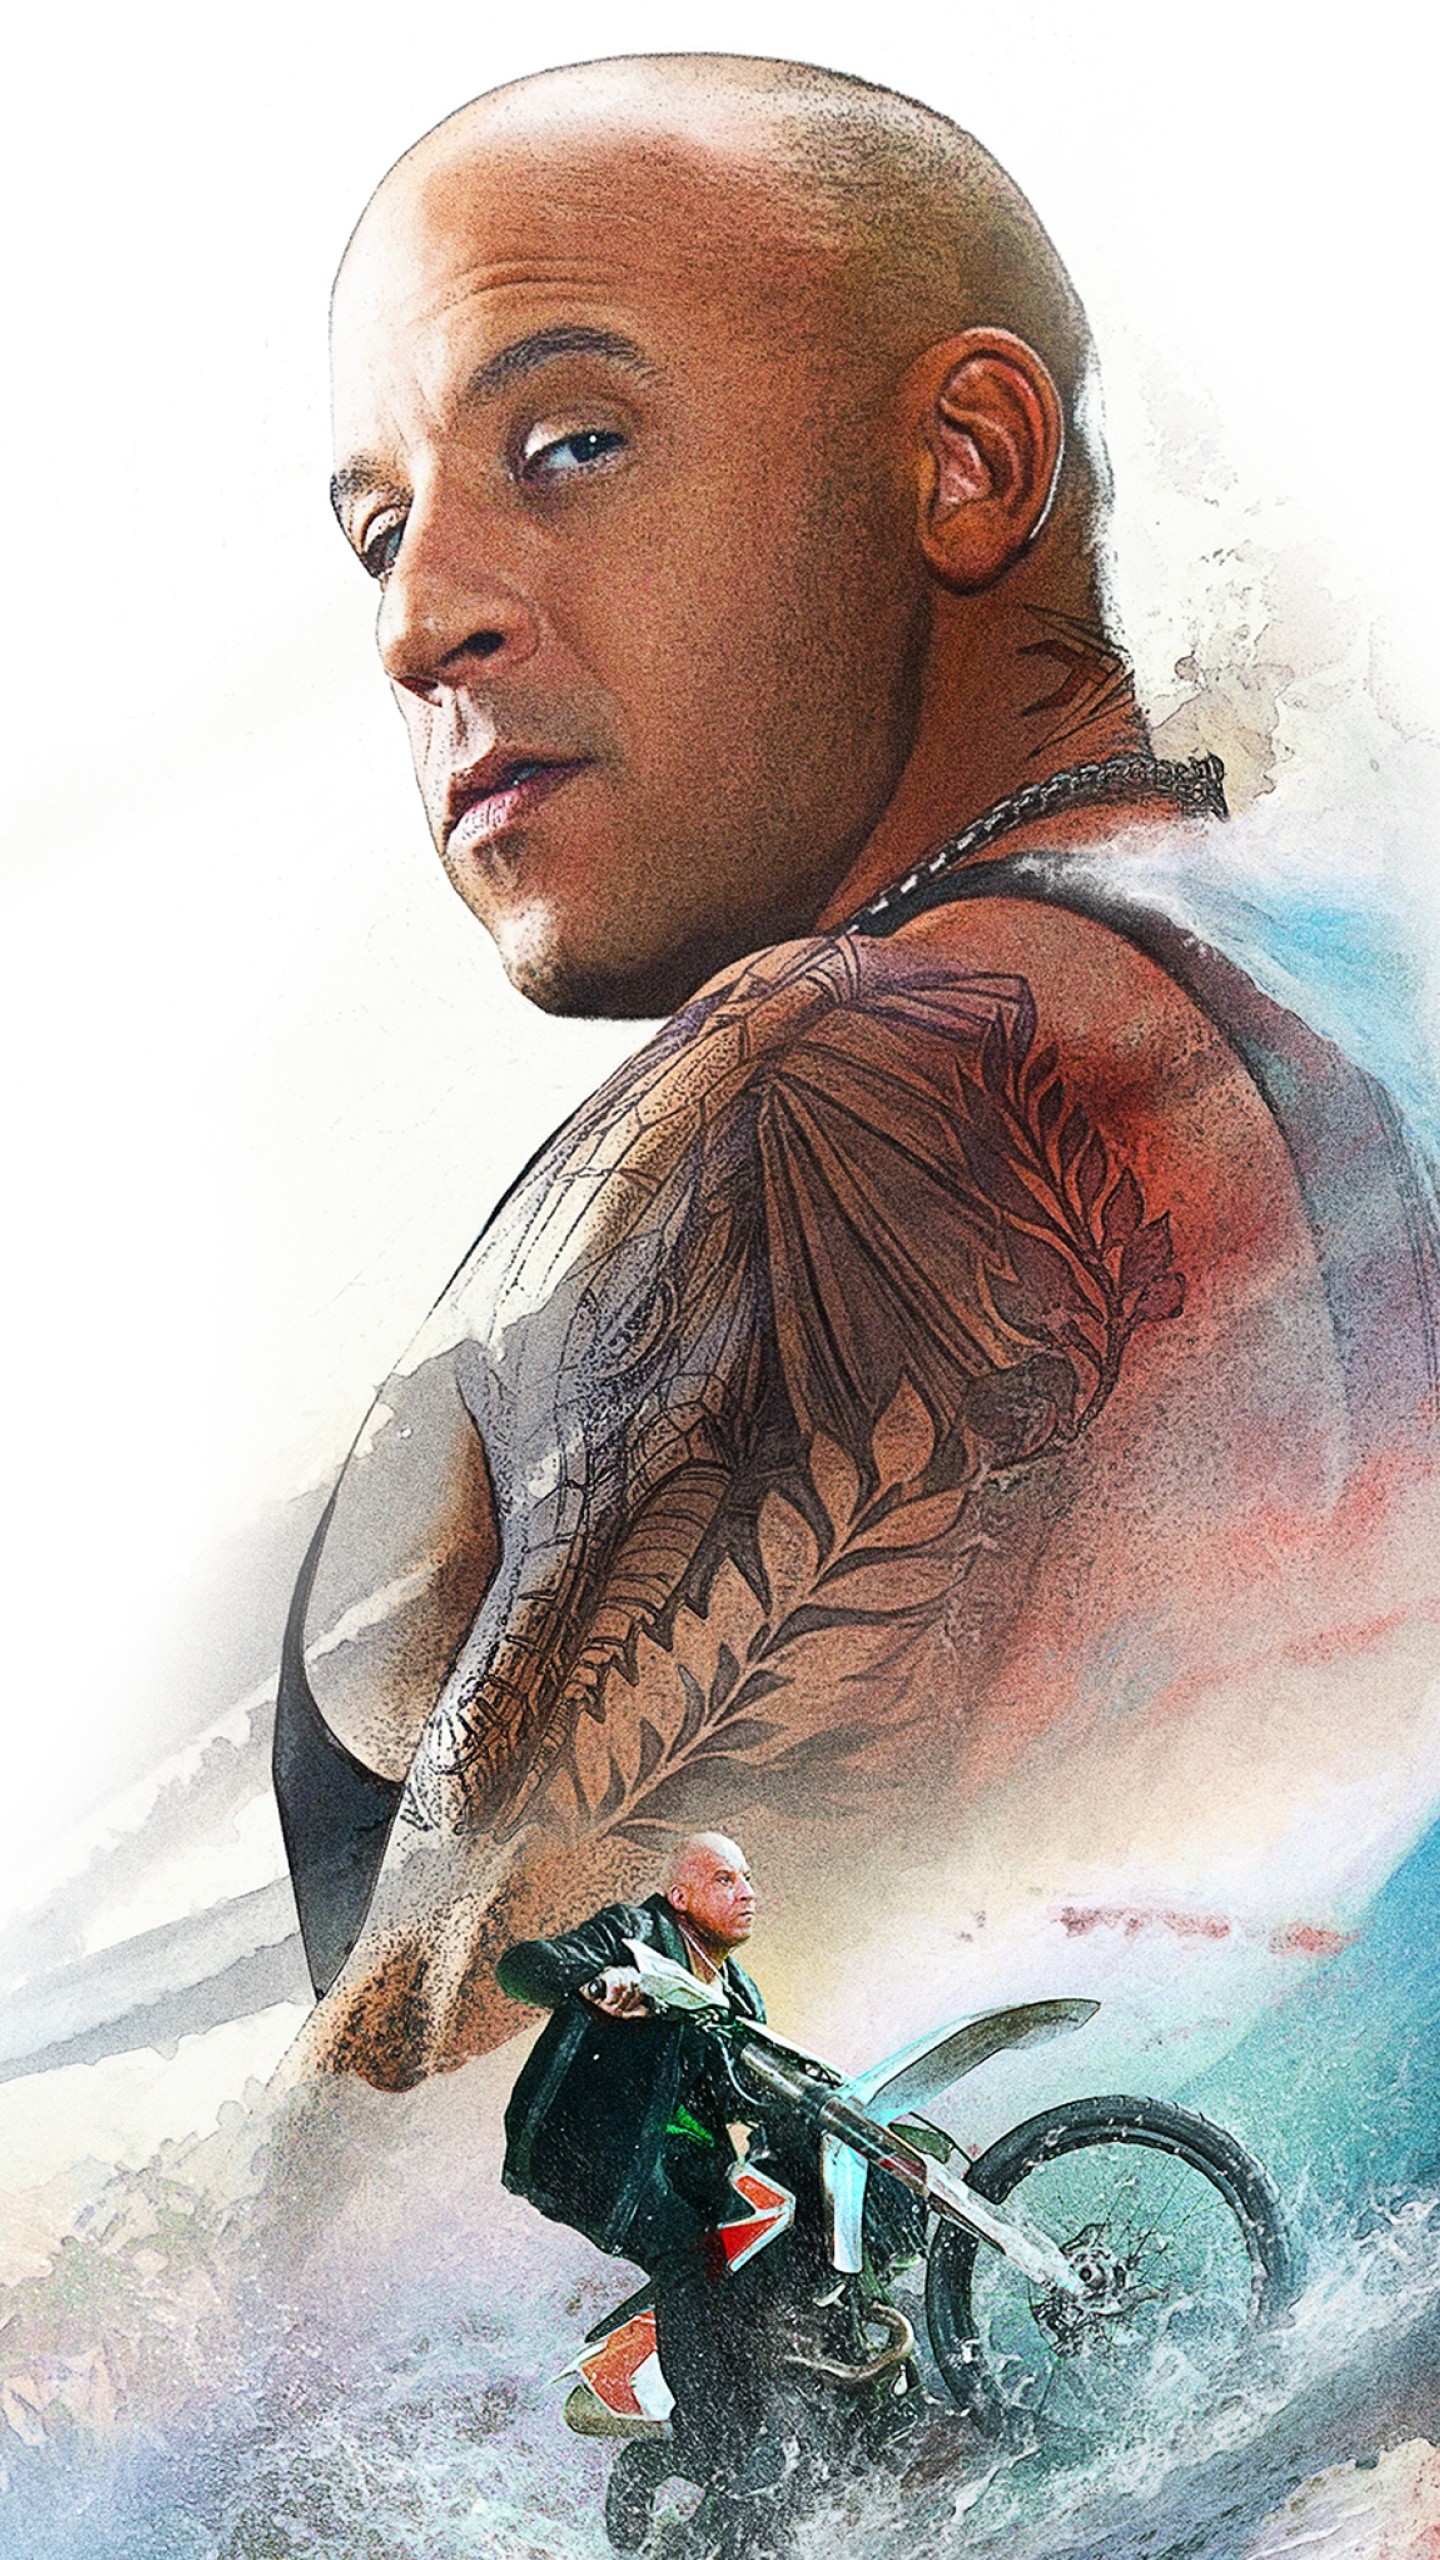 Fast & Furious Vin Diesel Wallpaper for iPhone 11, Pro Max, X, 8, 7, 6 -  Free Download on 3Wallpapers